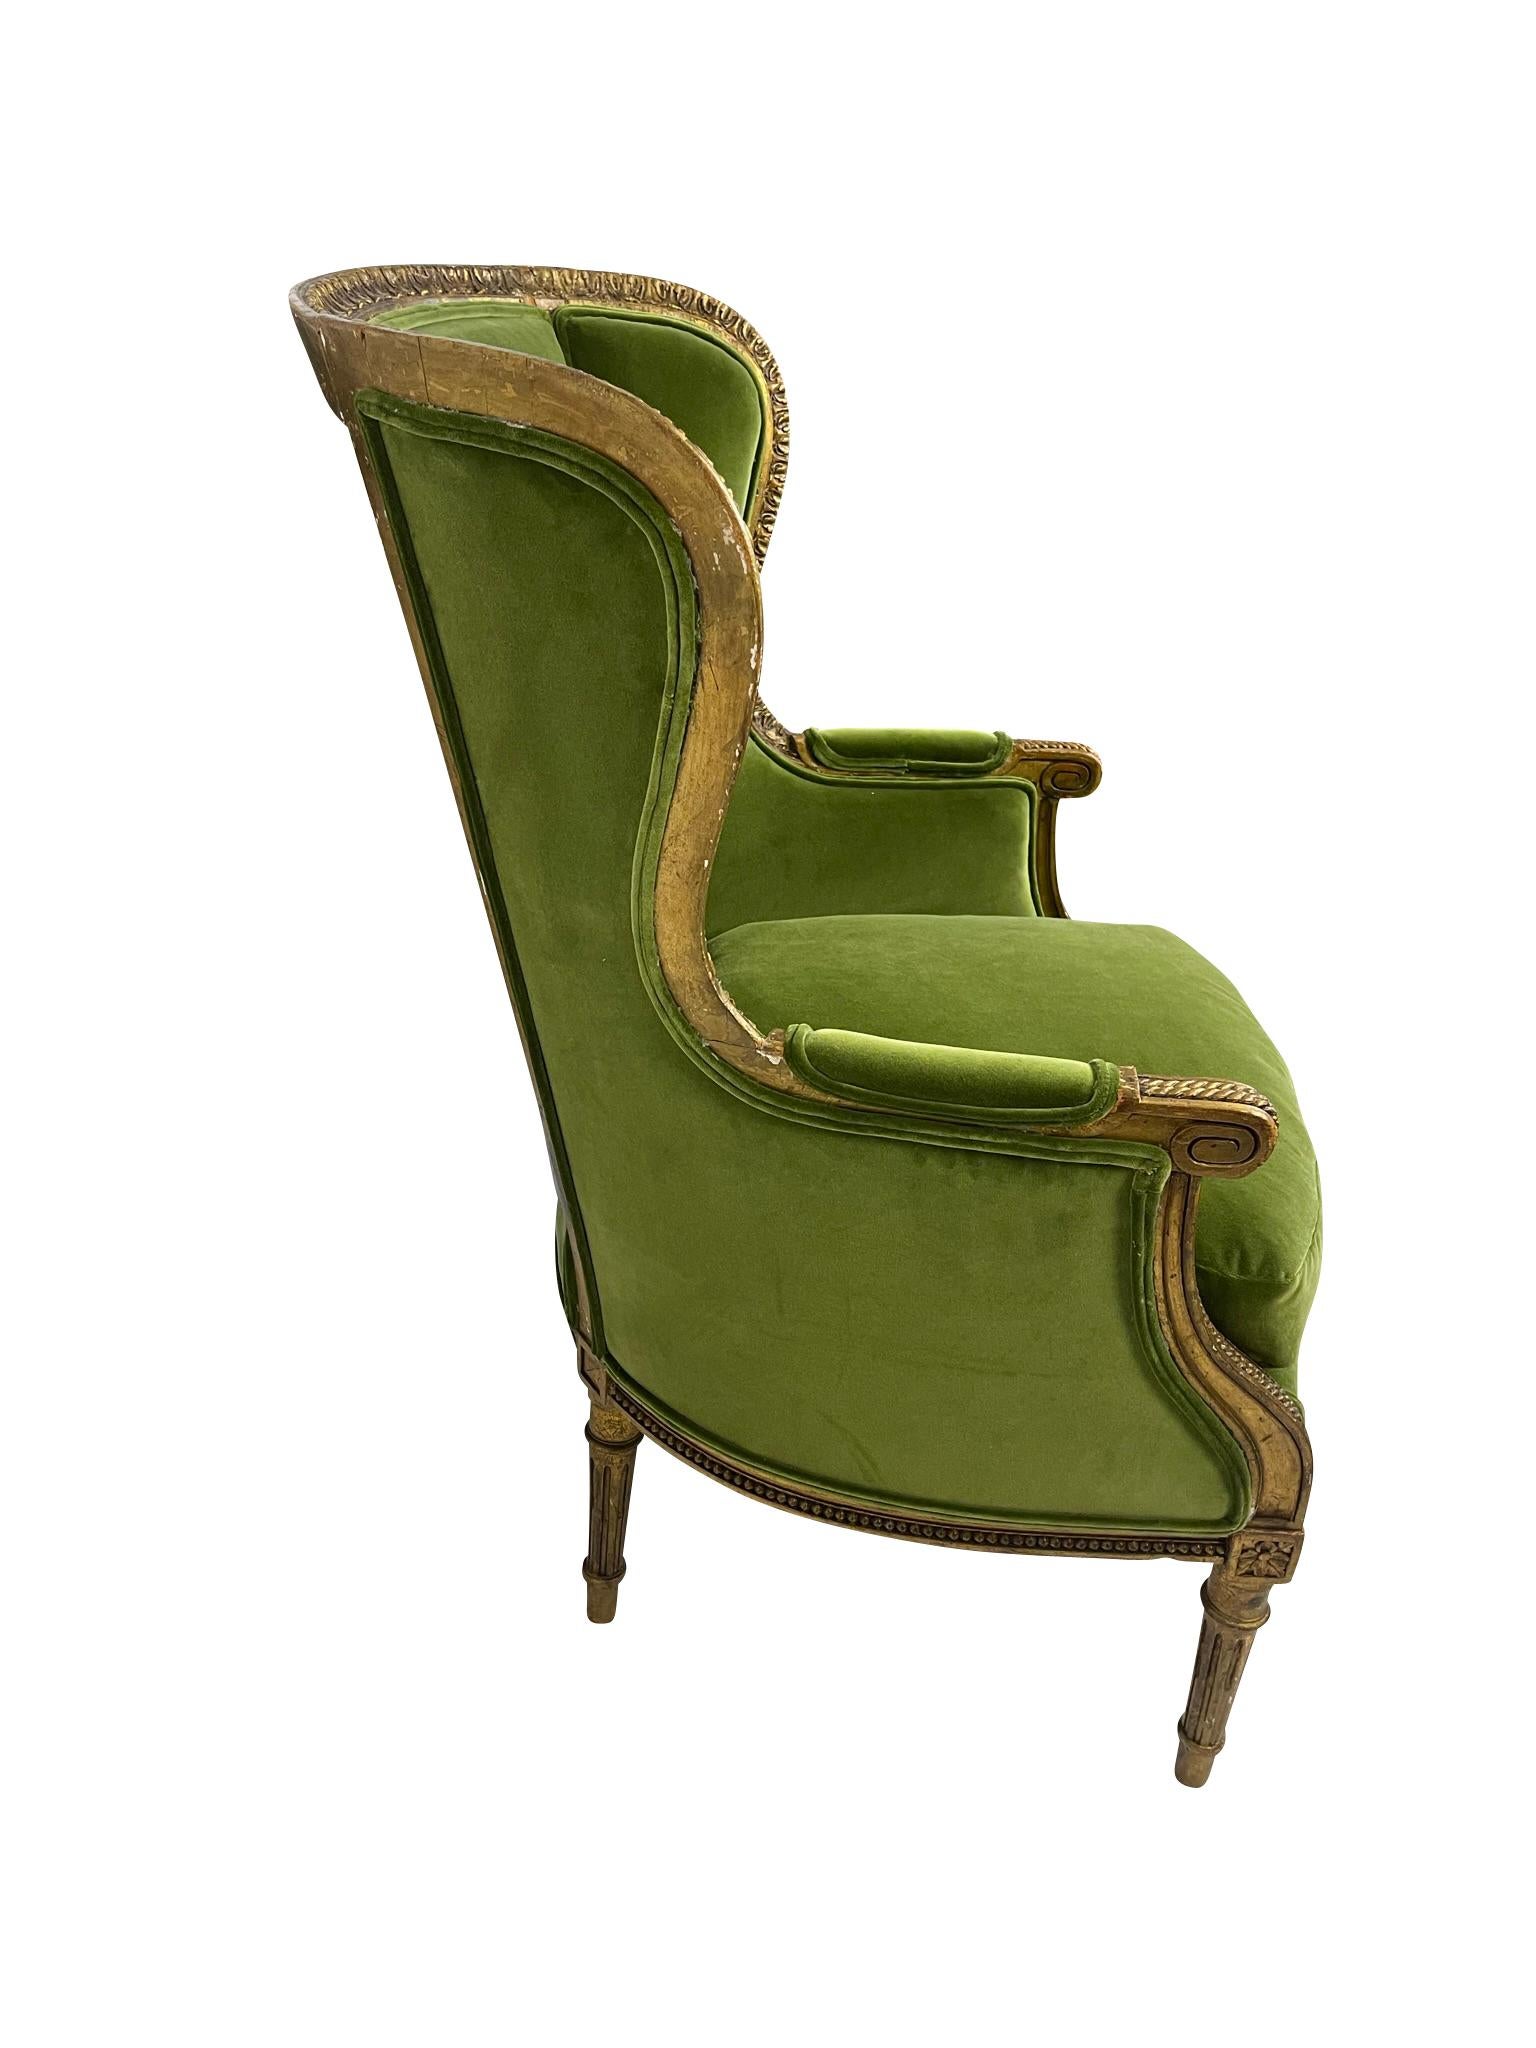 Hand-Carved Louis XVI Style Giltwood Carved Bergere/ Arnchair with Green Velvet For Sale